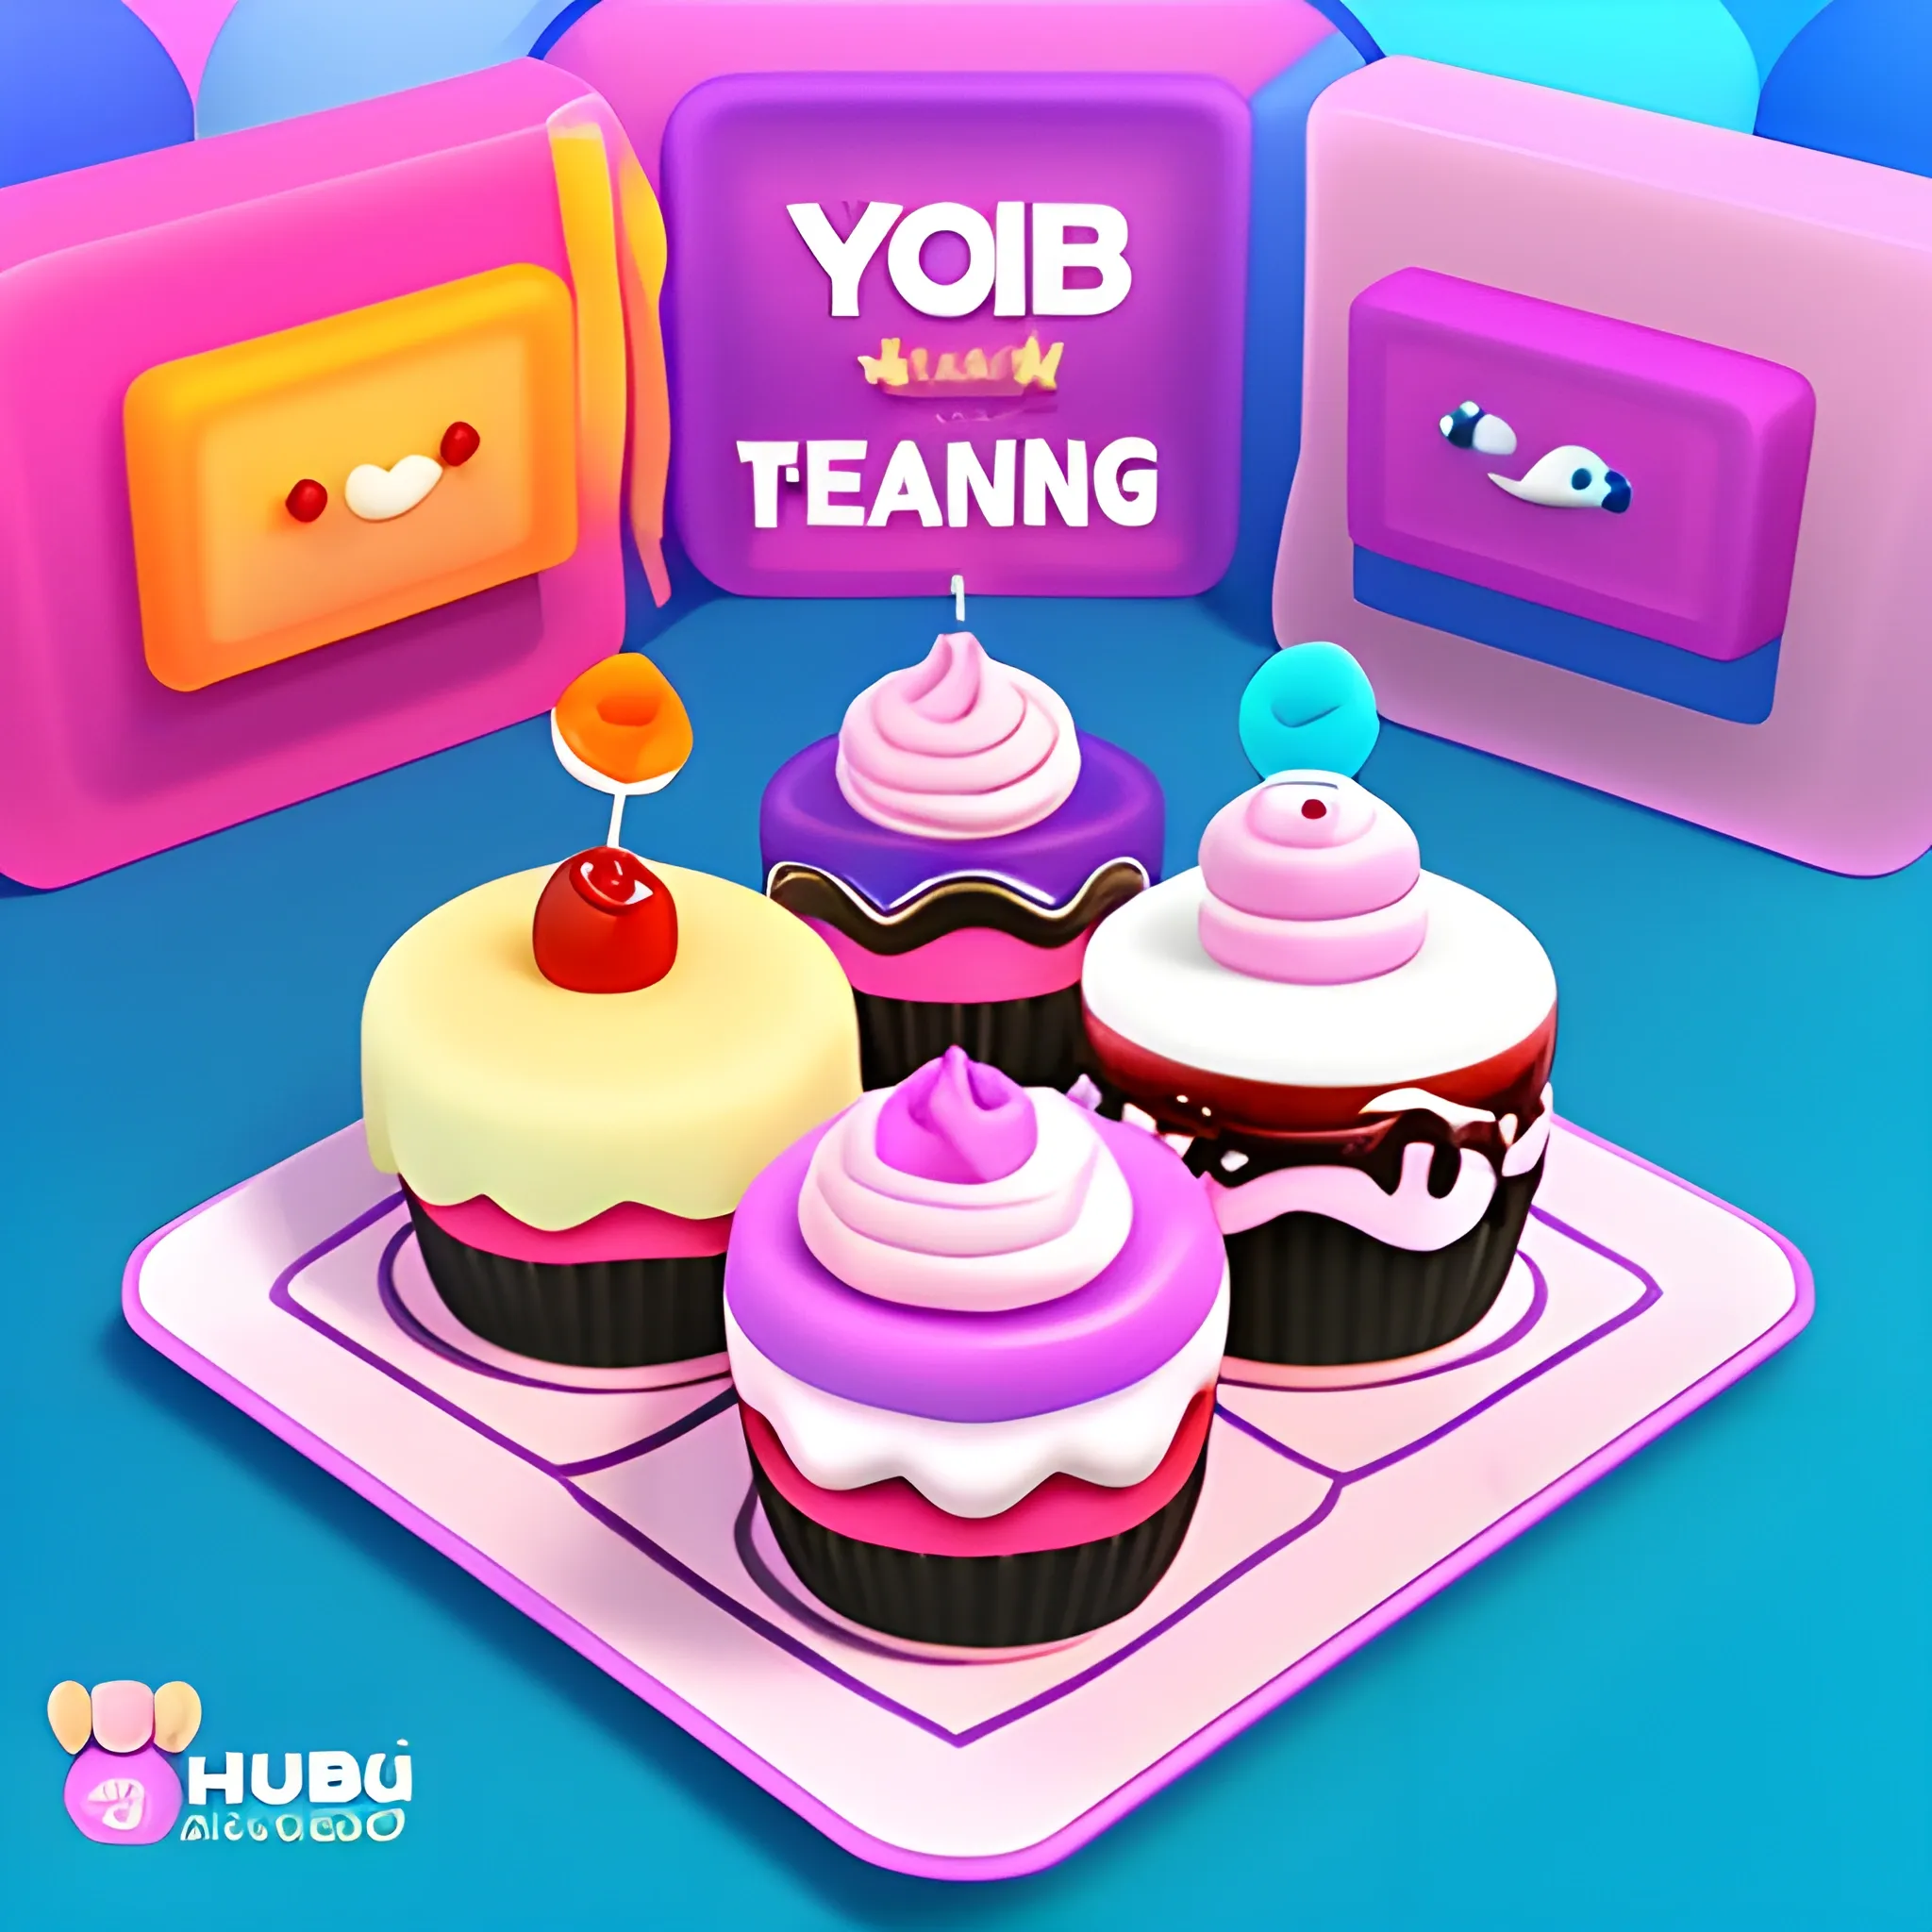 MUKBANG YouTube channel logo, jelly, cakes, sweets "HUBA TEAM", 3D